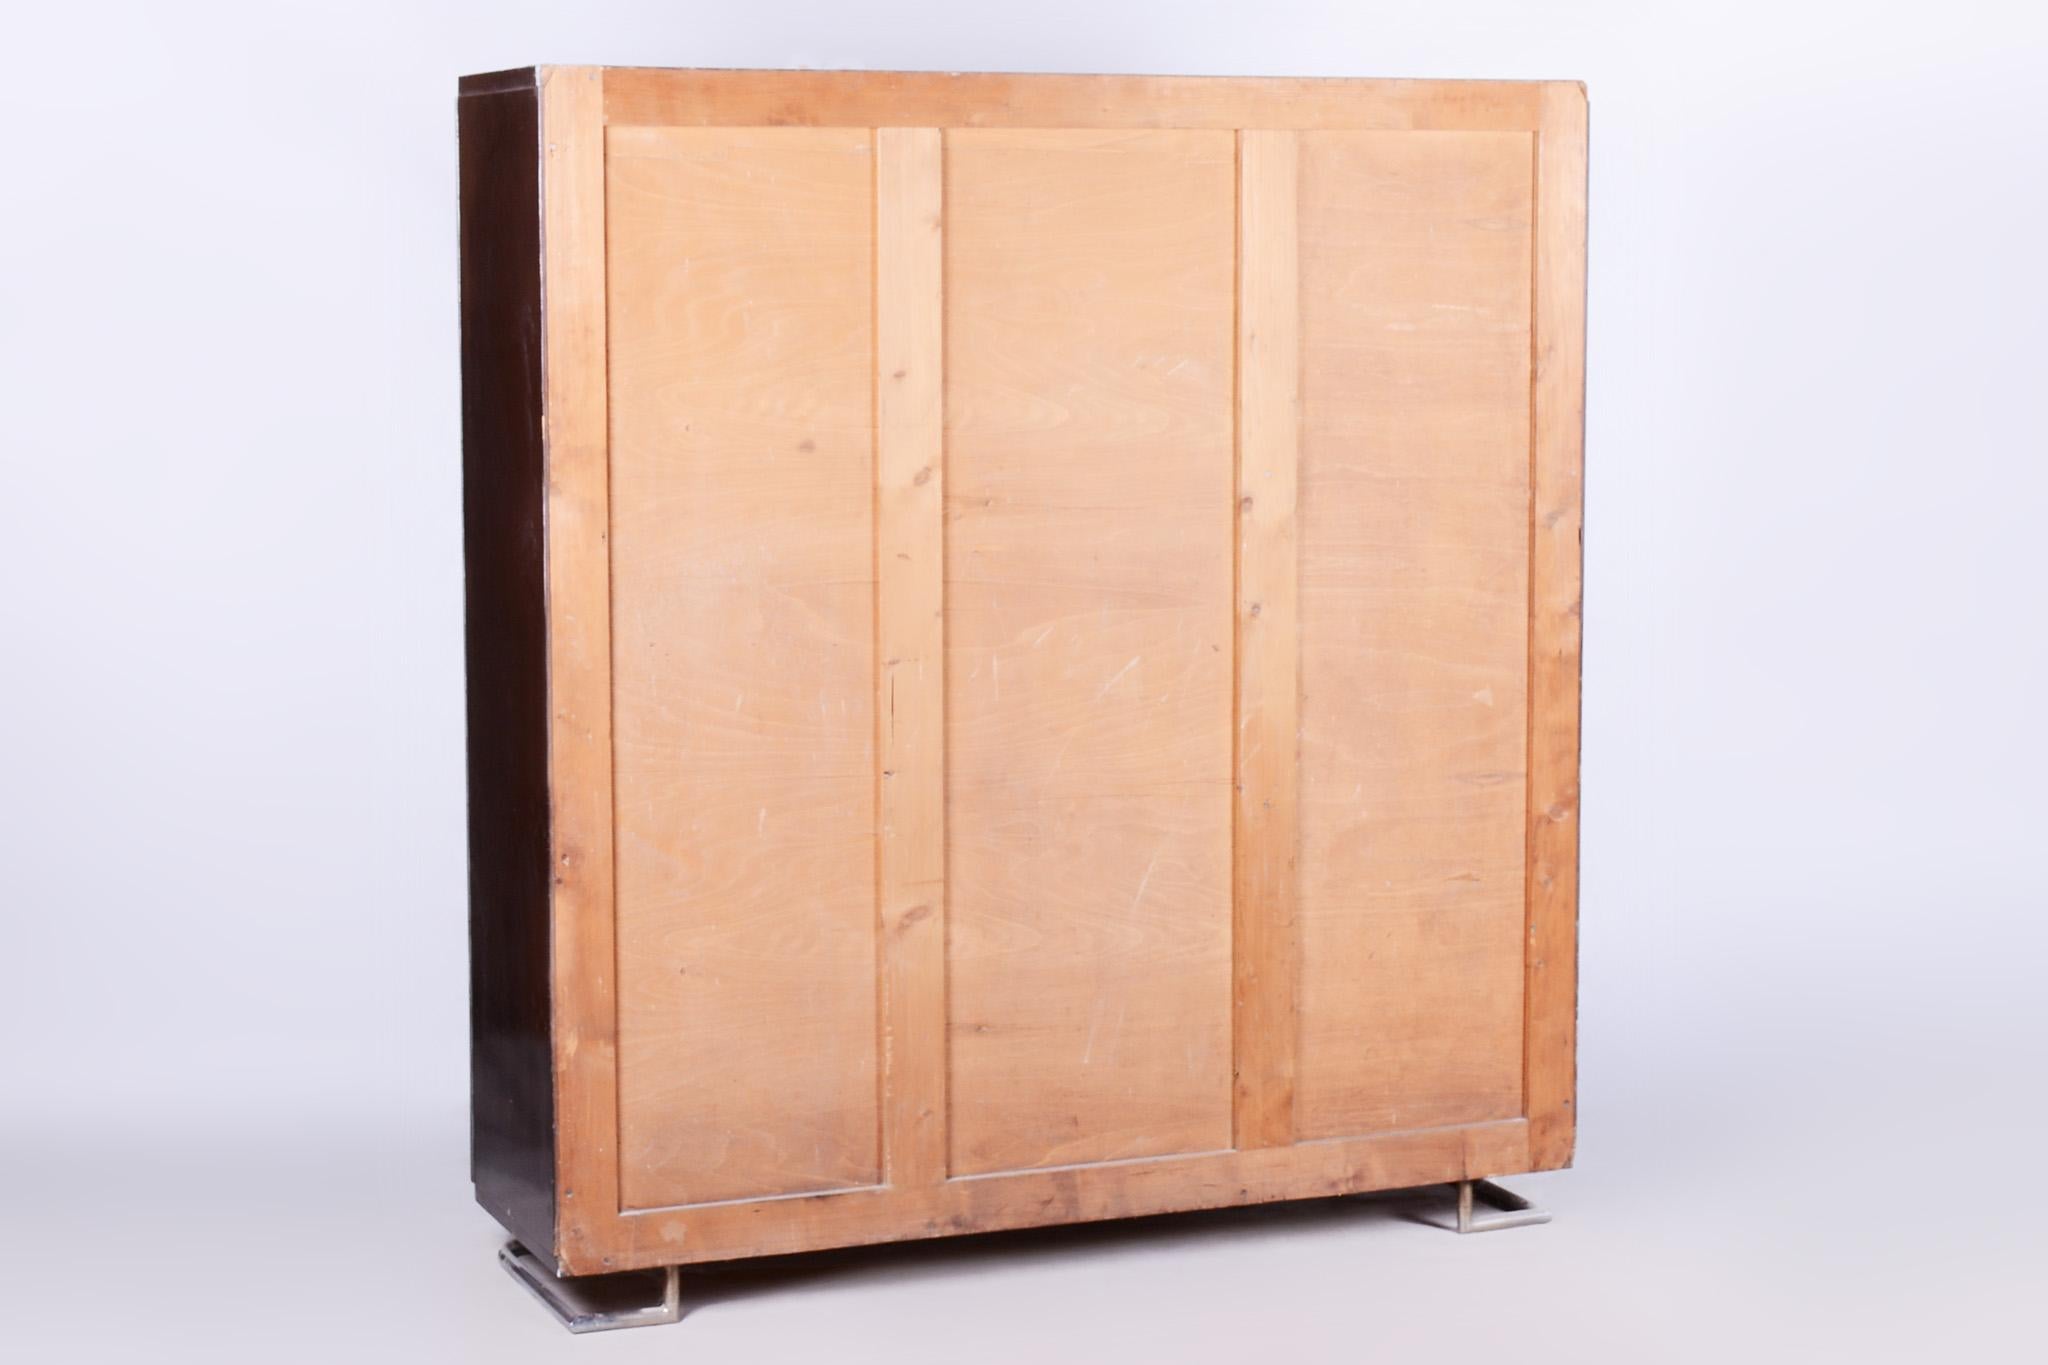 Restored triple-door wardrobe by Mücke - Melder.

Maker: Mücke - Melder
Source: Czechia (Czechoslovakia)
Period: 1930-1939
Material: Lacquered Wood, Chrome-Plated Steel

It has been fully restored by our professional refurbishing team in